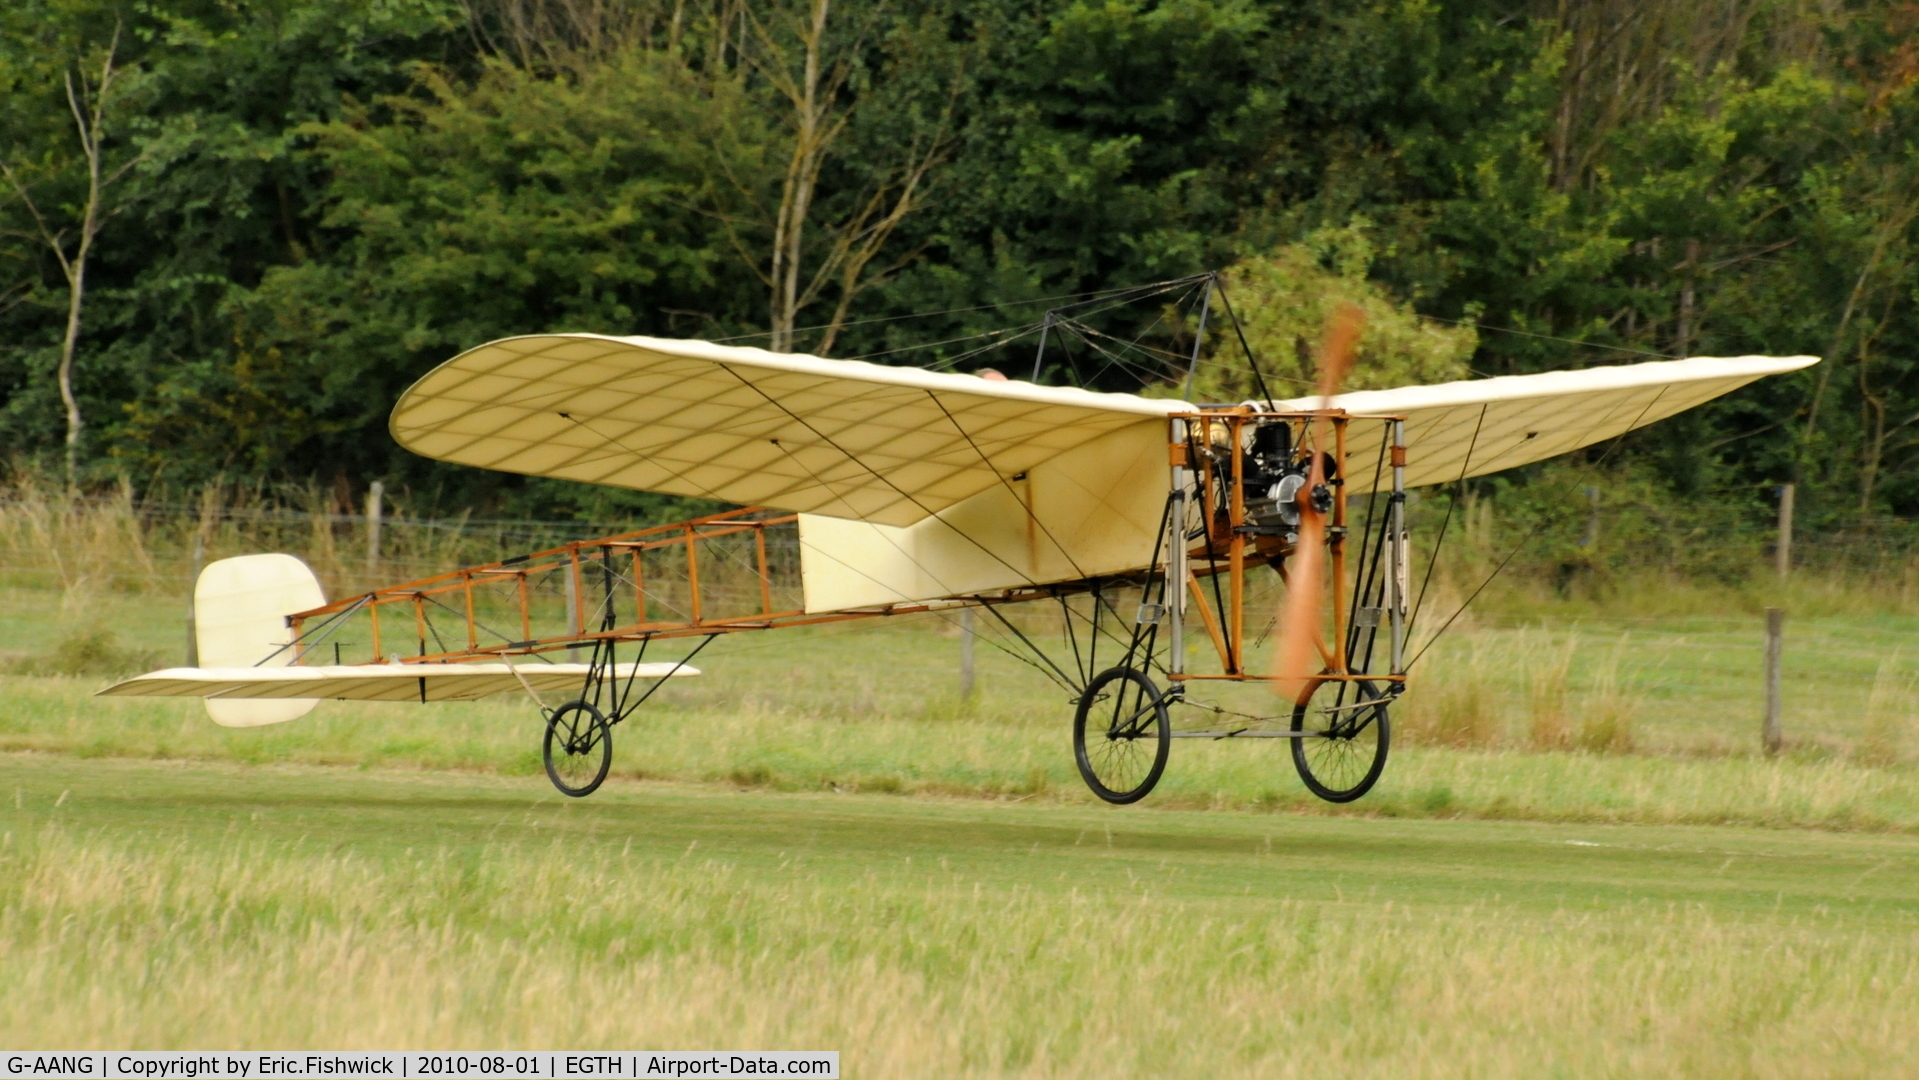 G-AANG, 1911 Bleriot Type XI C/N 14, 3. G-AANG throws off the shackles at Shuttleworth Military Pagent Air Display August 2010